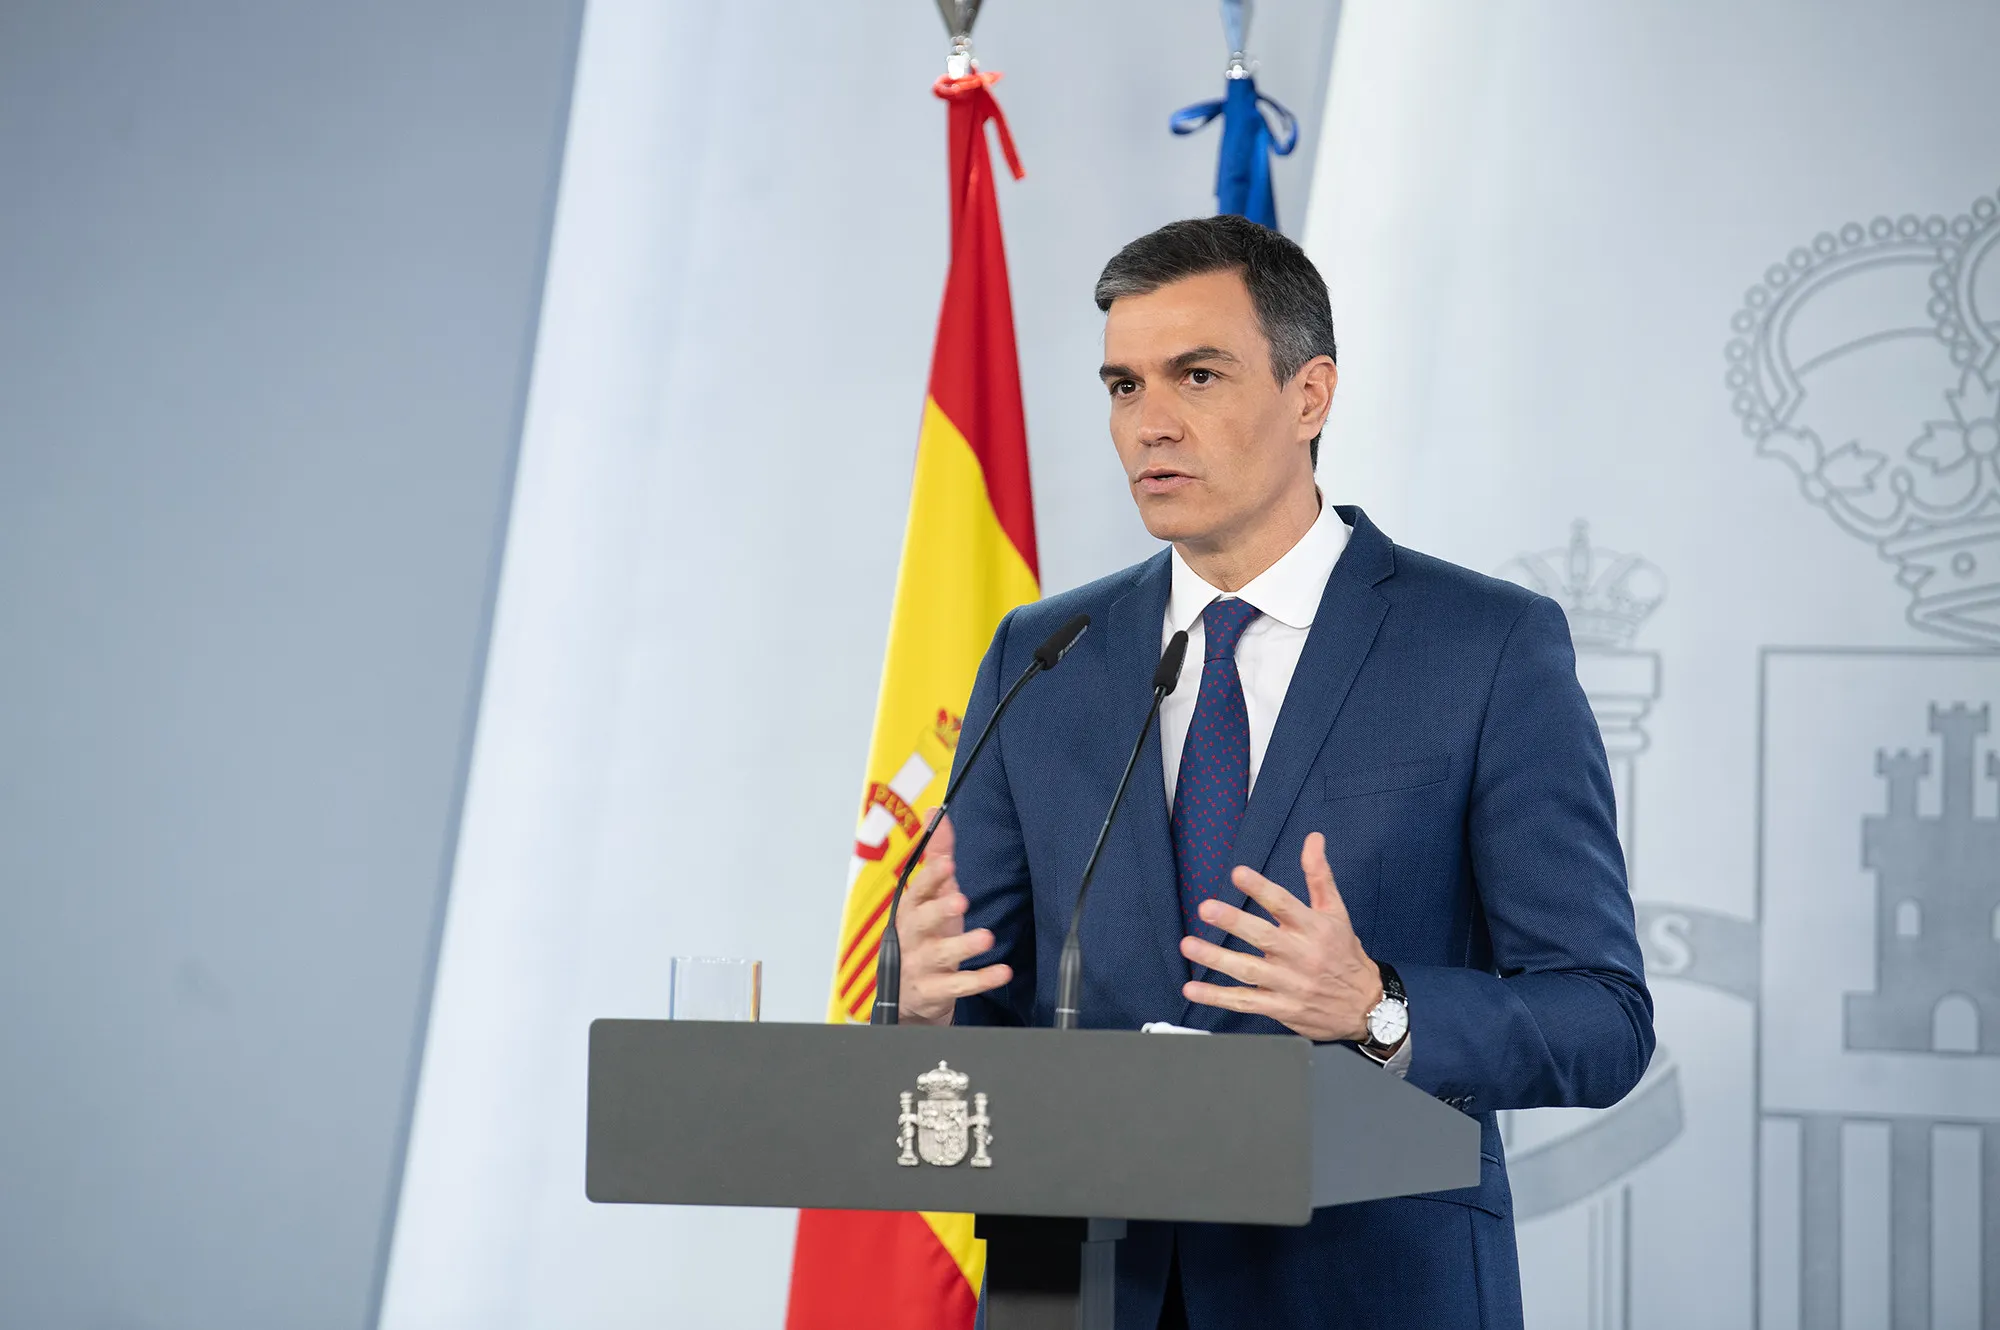 Pedro Sánchez, prime minister of Spain, speaks at a press conference in Madrid, April 13, 2021.?w=200&h=150